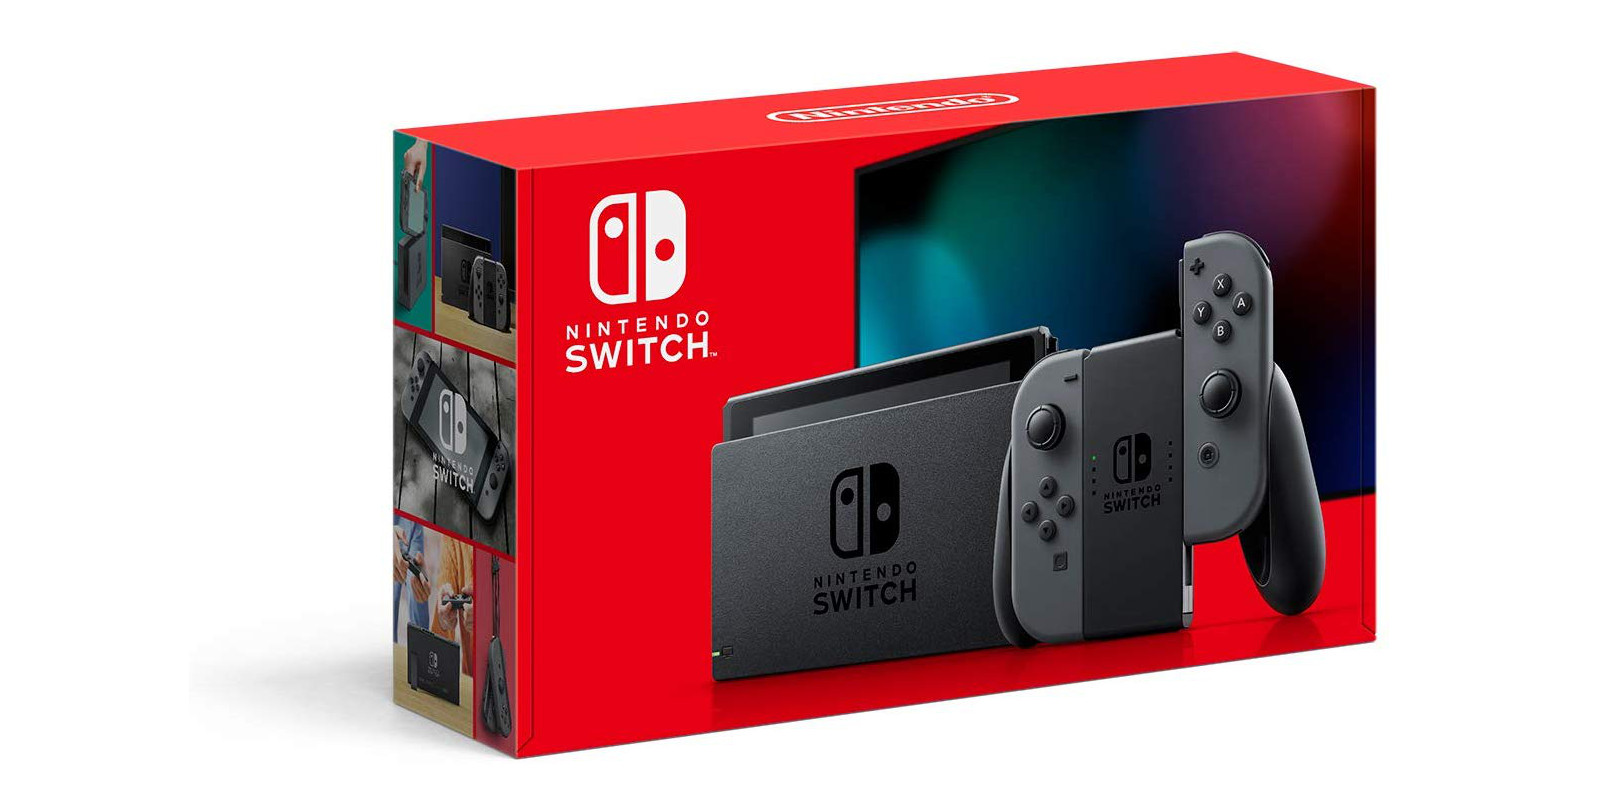 Score a new Nintendo Switch model from $100 - 9to5Toys